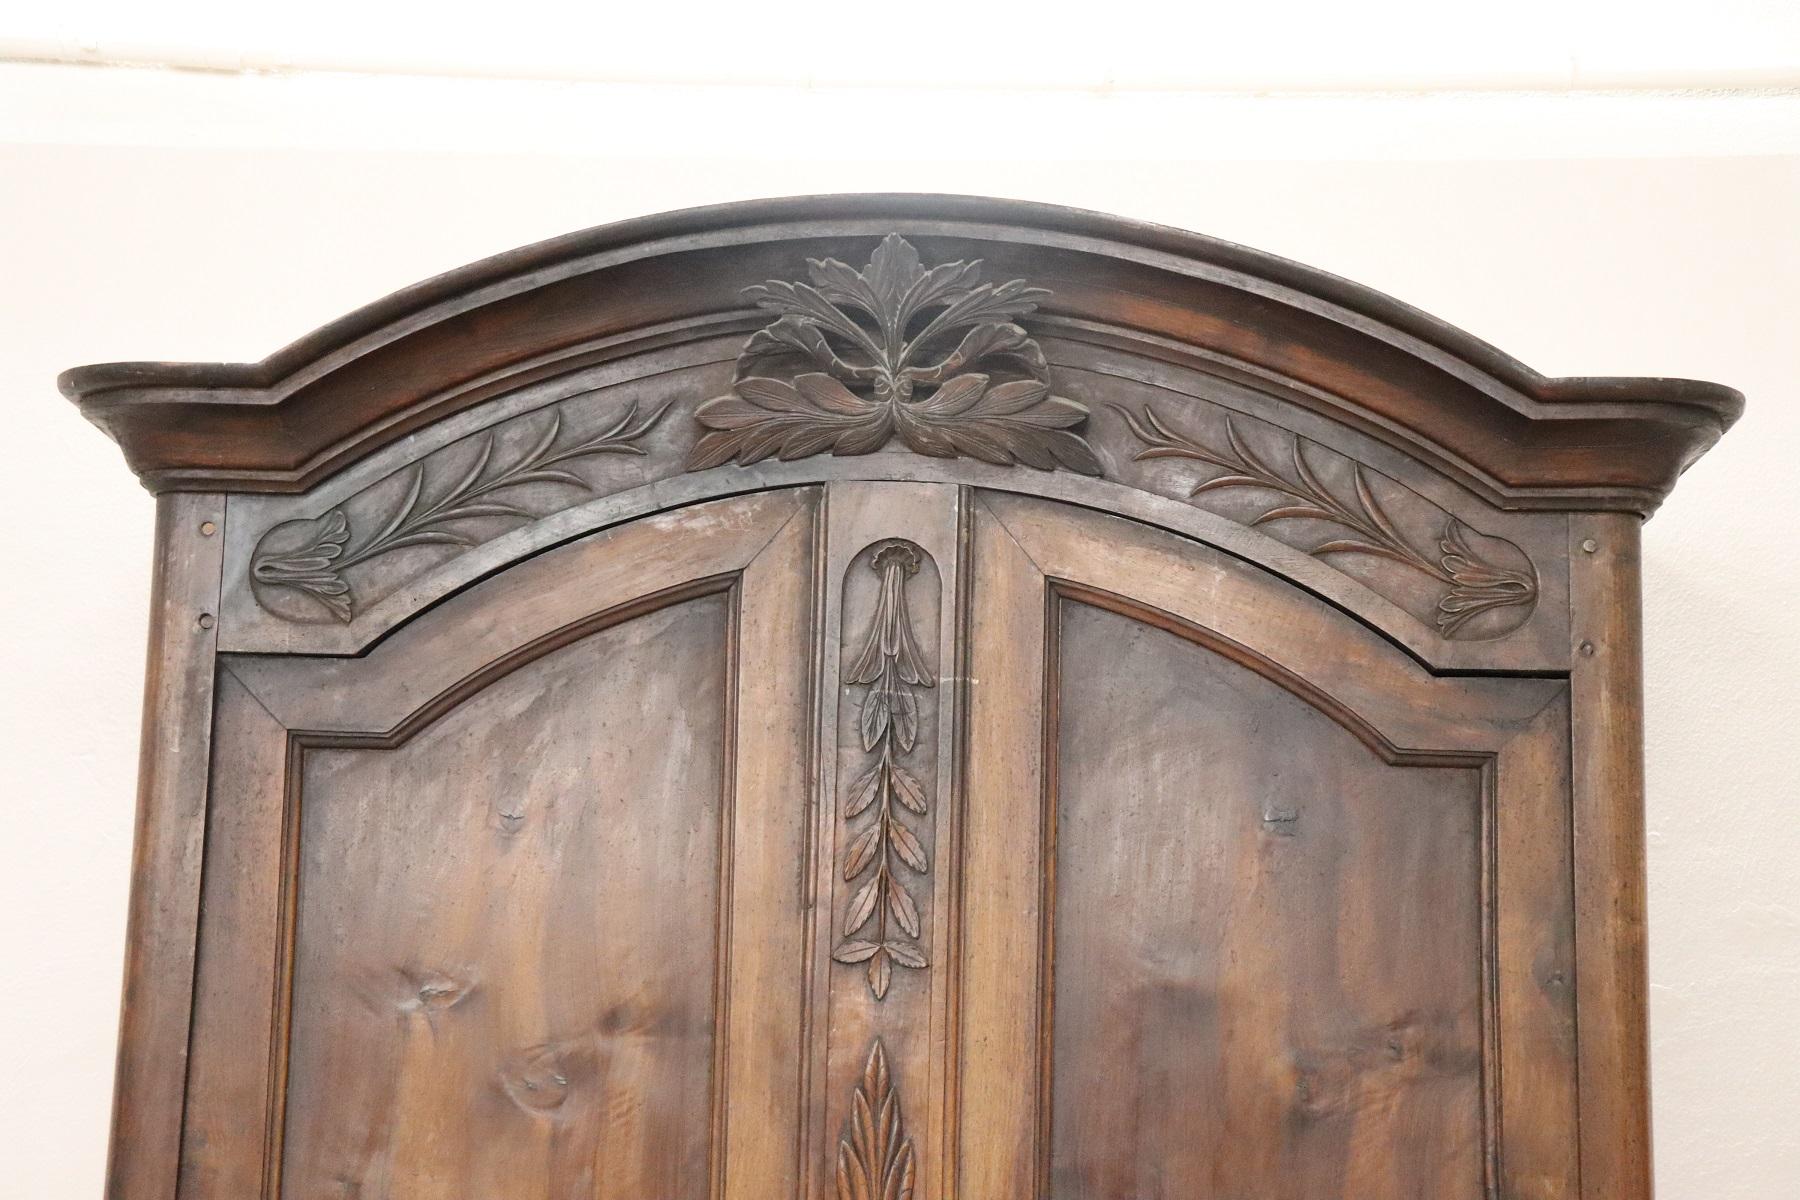 Rare and important antique wardrobe in solid walnut made in the late 18th century French Louis XV.
Characteristic wavy line with wood carvings on the floral taste front. Beautiful curly carved feet. The solid walnut is of great patina. Completely